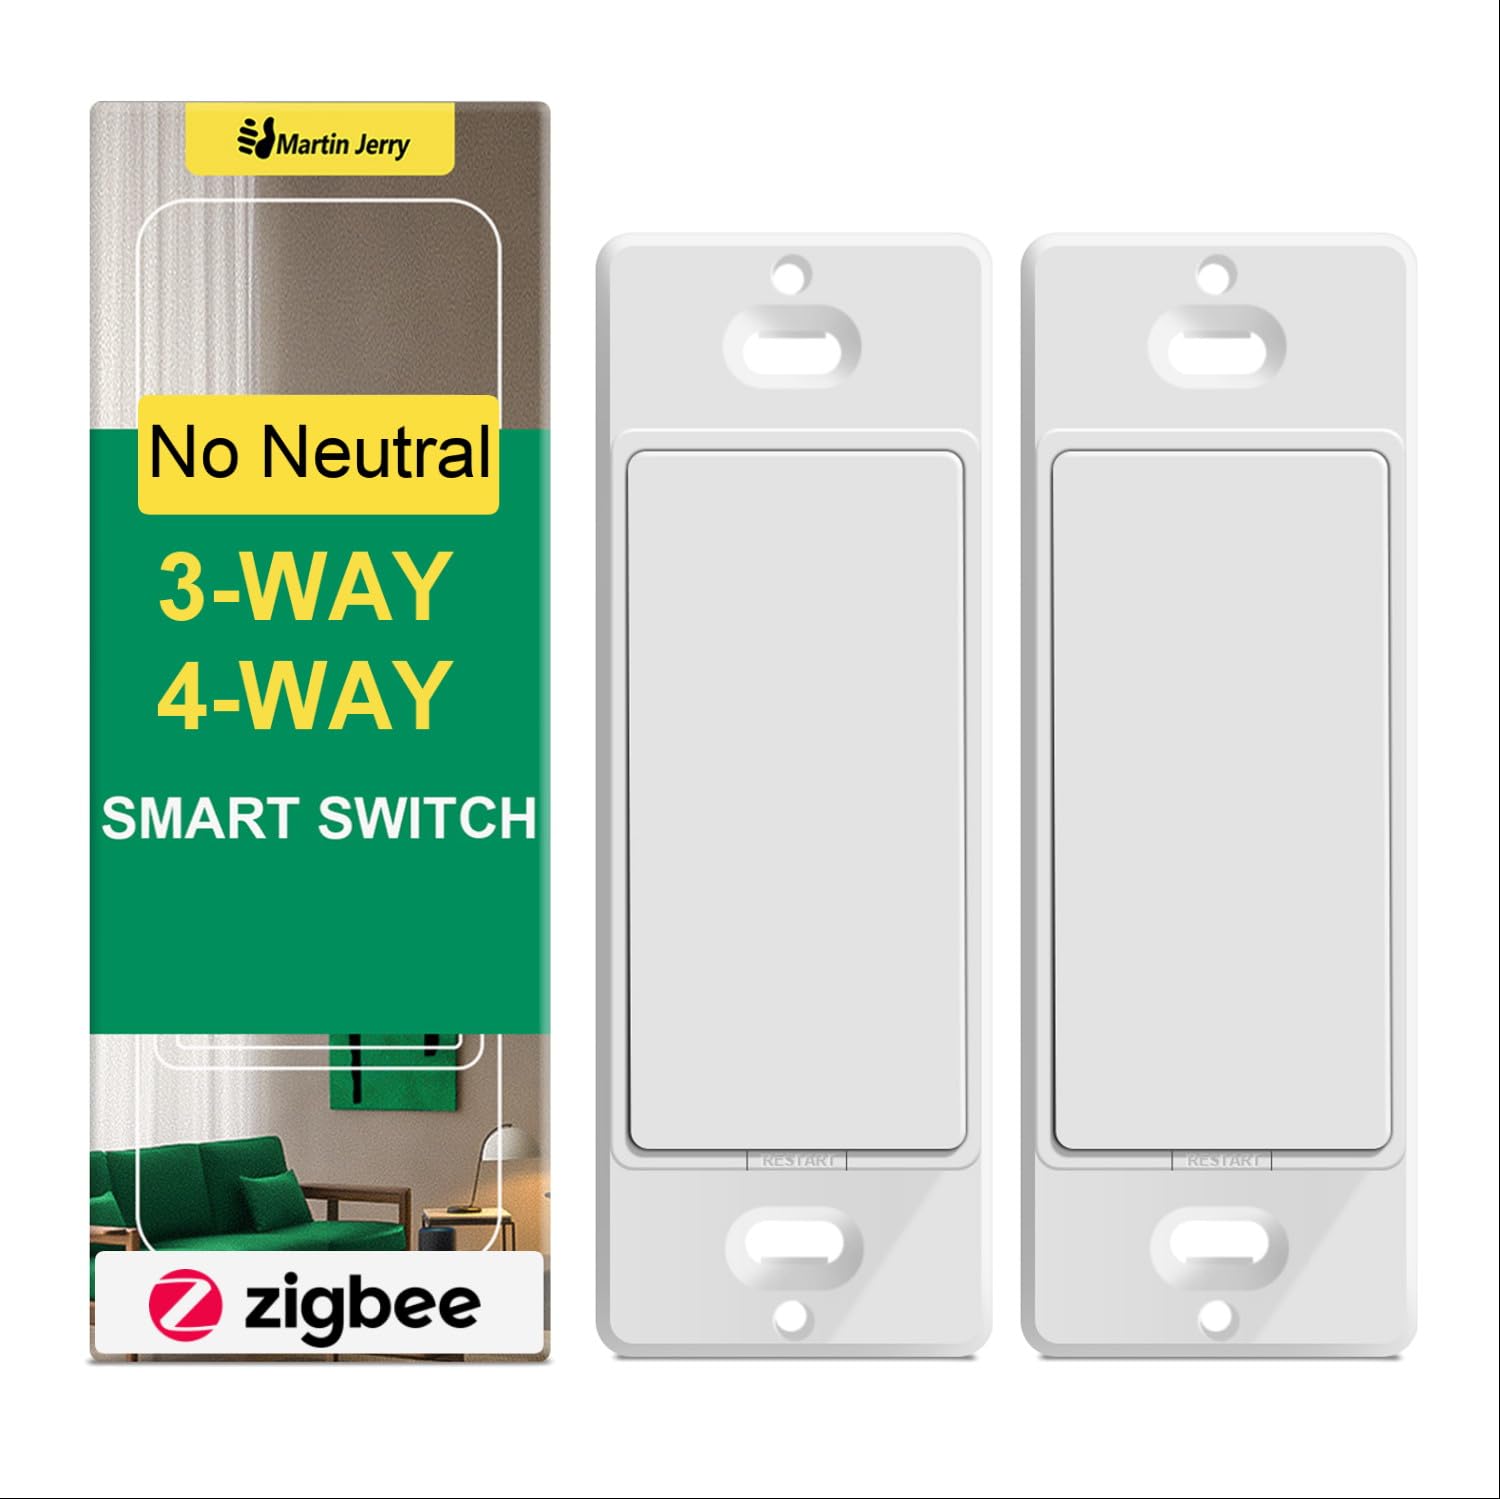 Limited-Time Sale: Upgrade Your Home with Zigbee 3 Way Smart Switch - Get 20% Off Now!